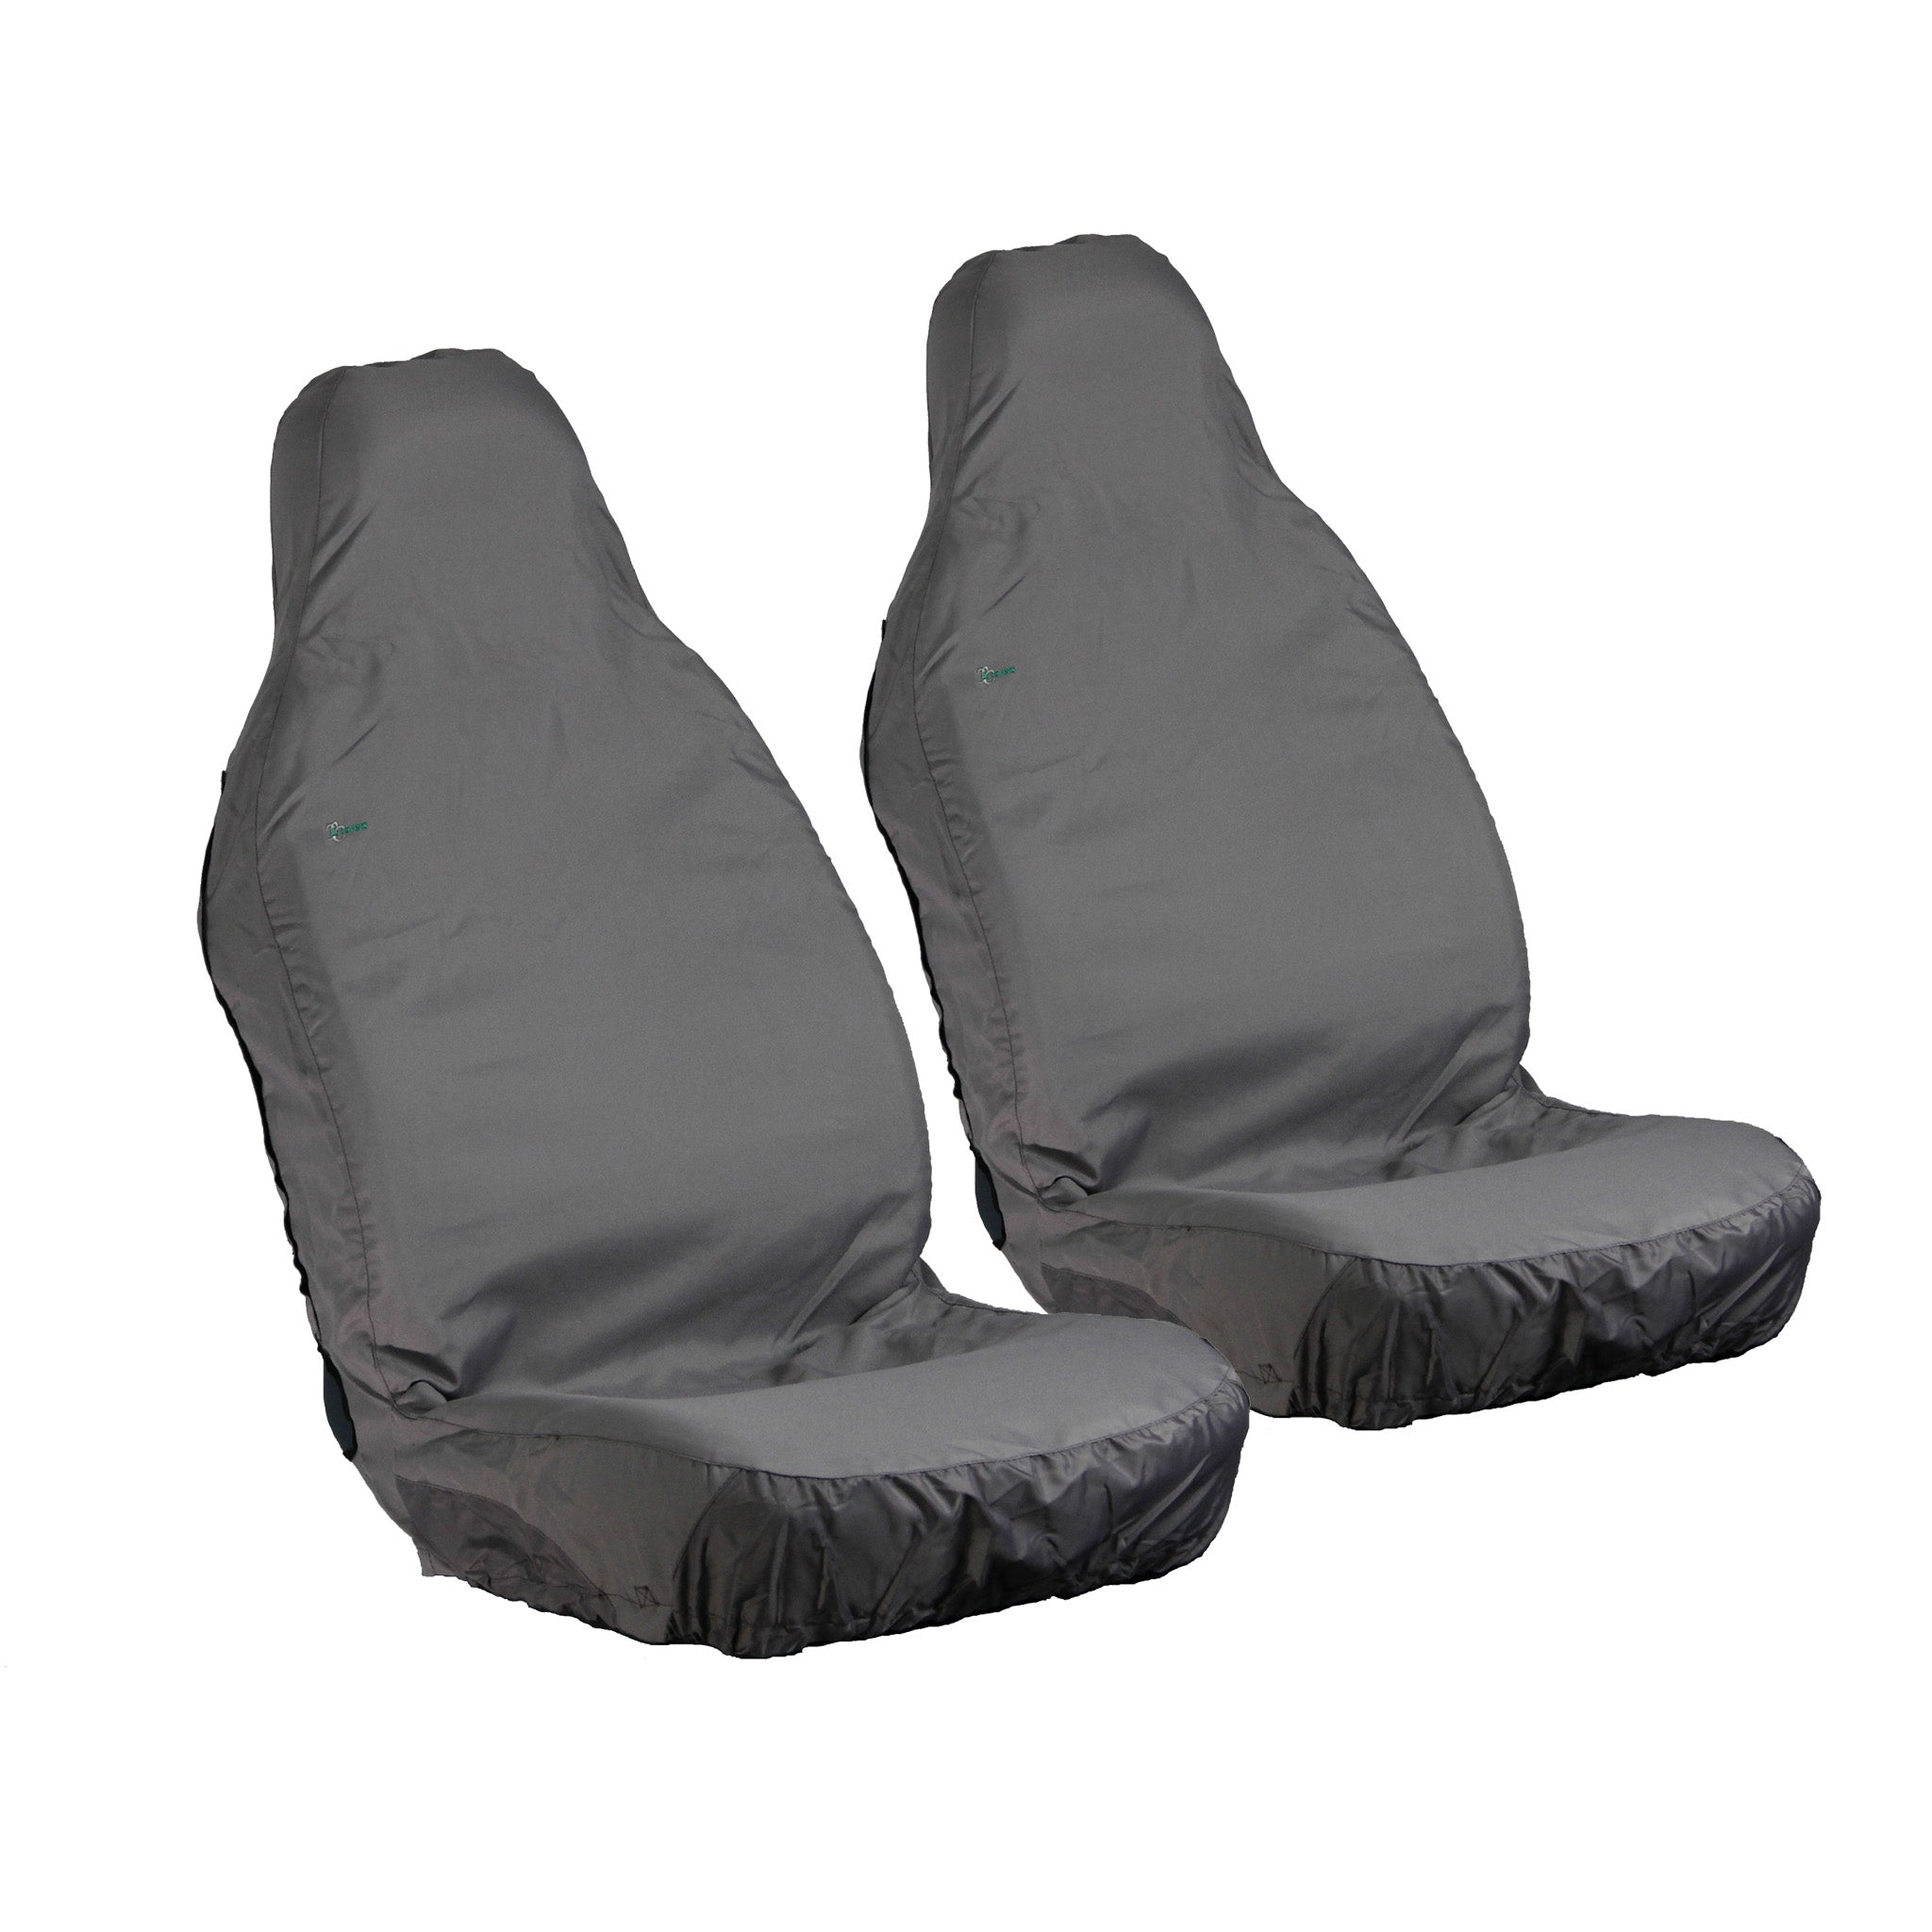 Front Car Seat Cover Set - Not Airbag Compatible